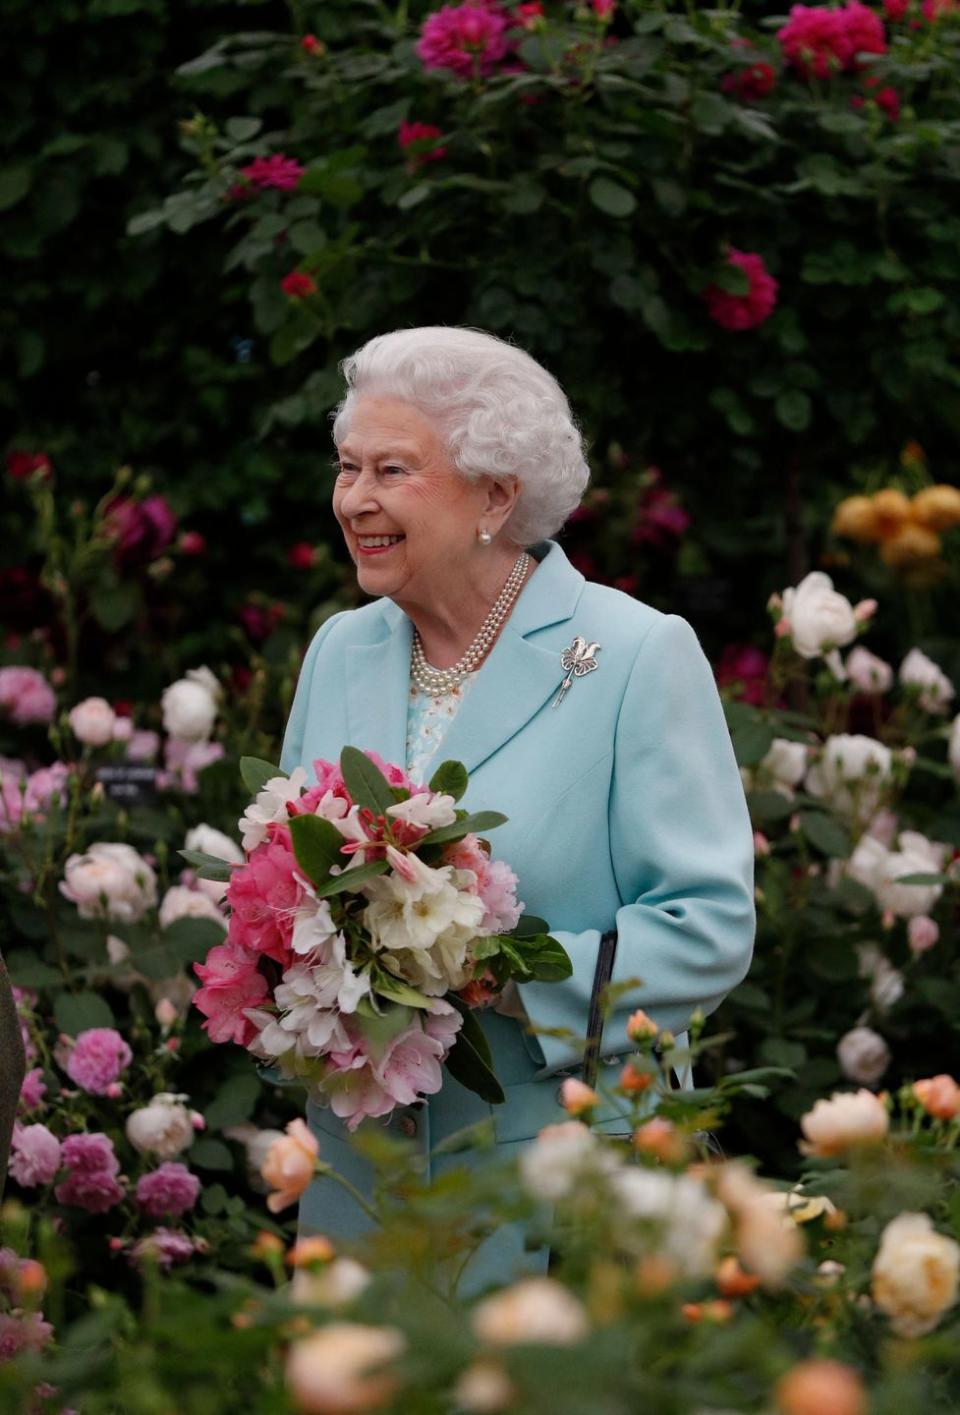 <p>In celebration of The Queen's 90th birthday, the RHS installed a floral arch at the Bullring Gate entrance, made with flowers donated by British growers. It was created by leading floral designer Shane Connolly and installed with the help of students from UK floristry colleges. A second floral arch adorned the London Gate.</p>